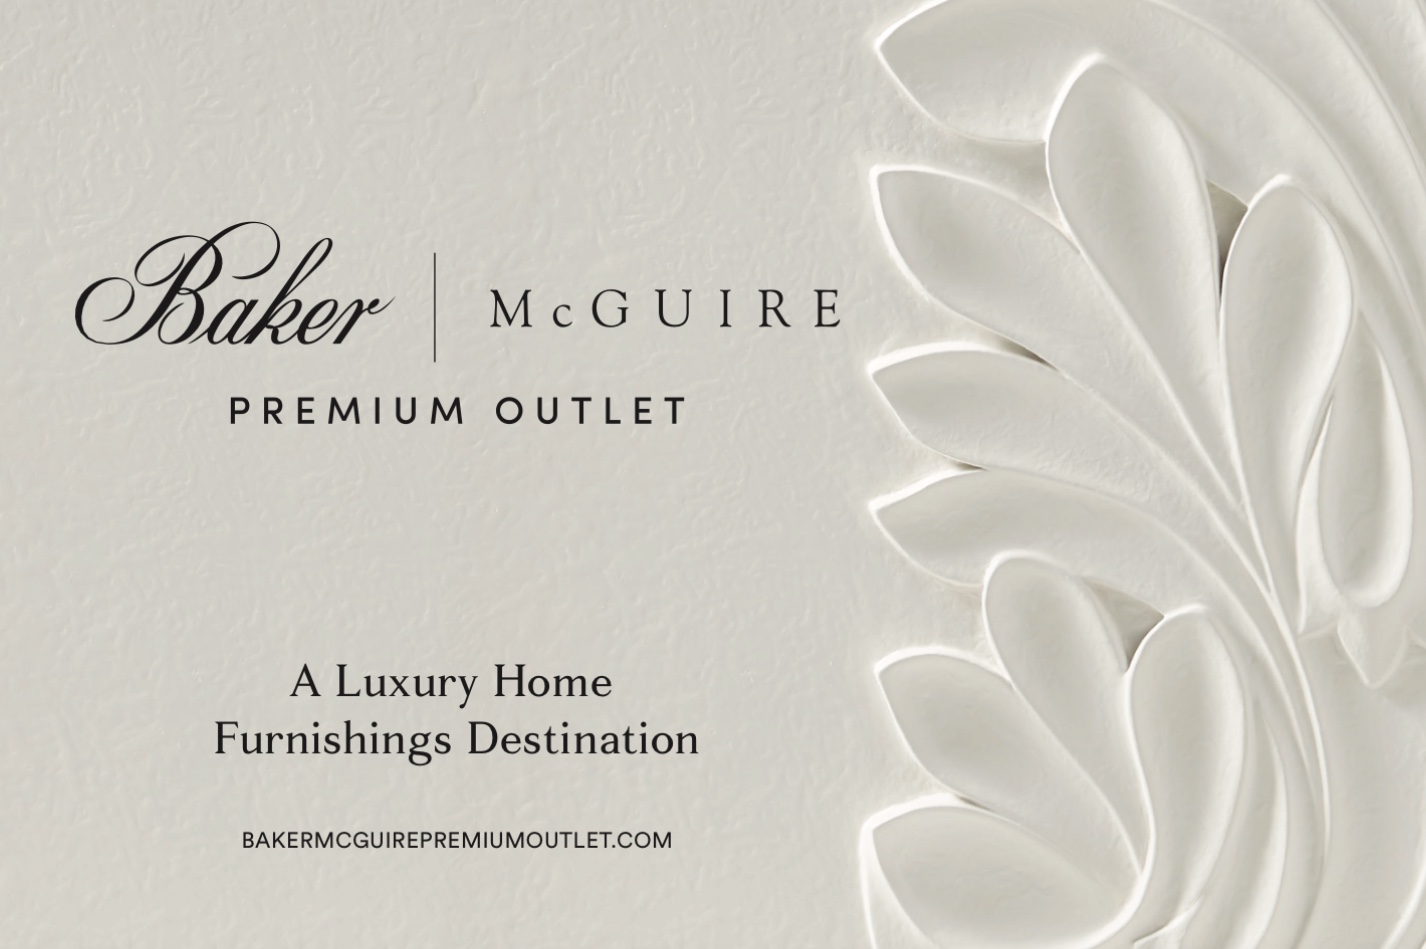 Introducing the Baker | McGuire Premium Outlet at Baker | McGuire - News from Laguna Design Center